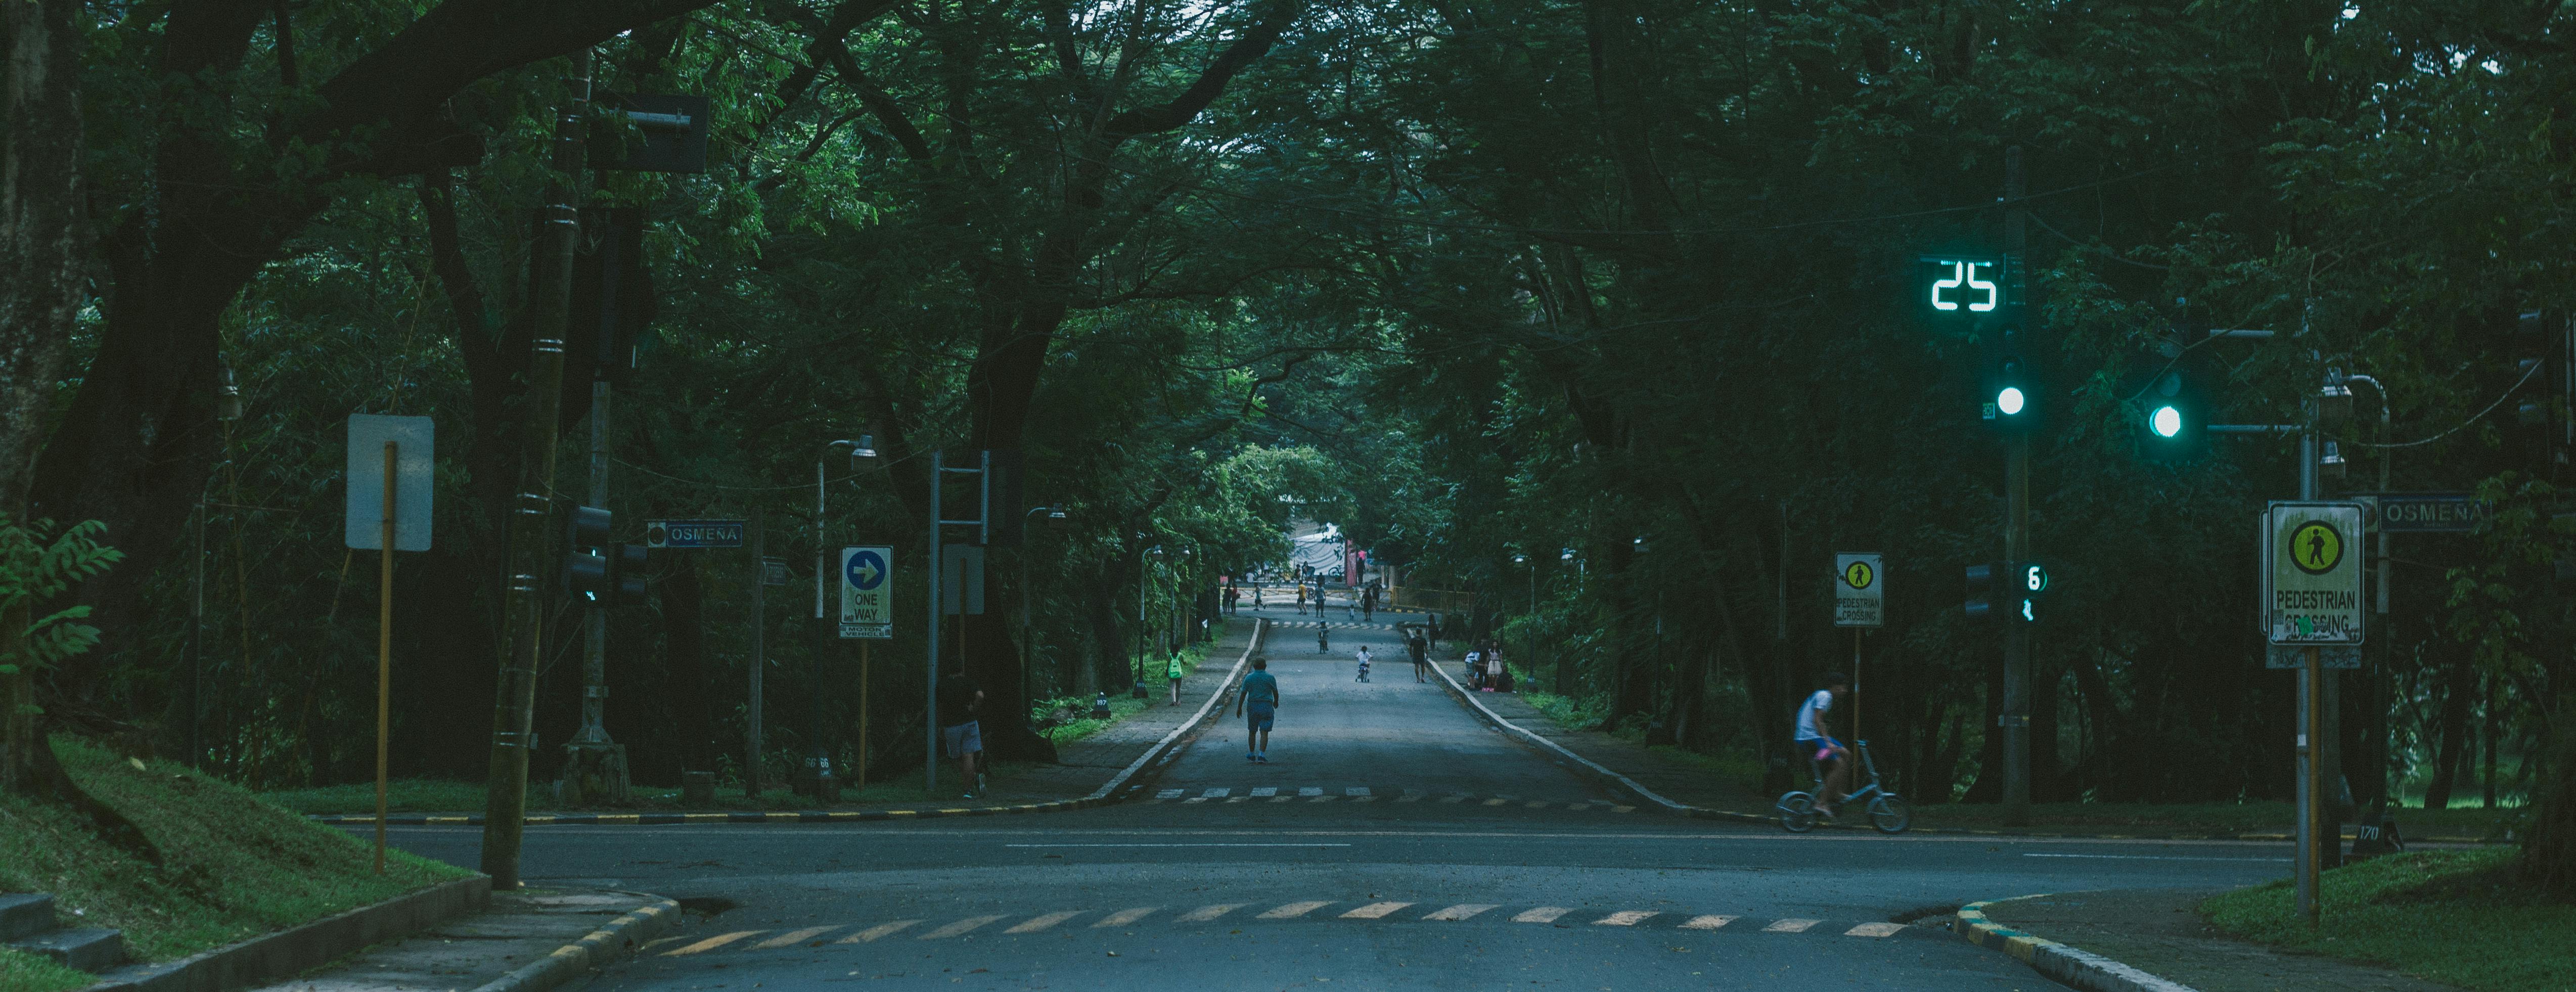 Free stock photo of diliman, street, trees